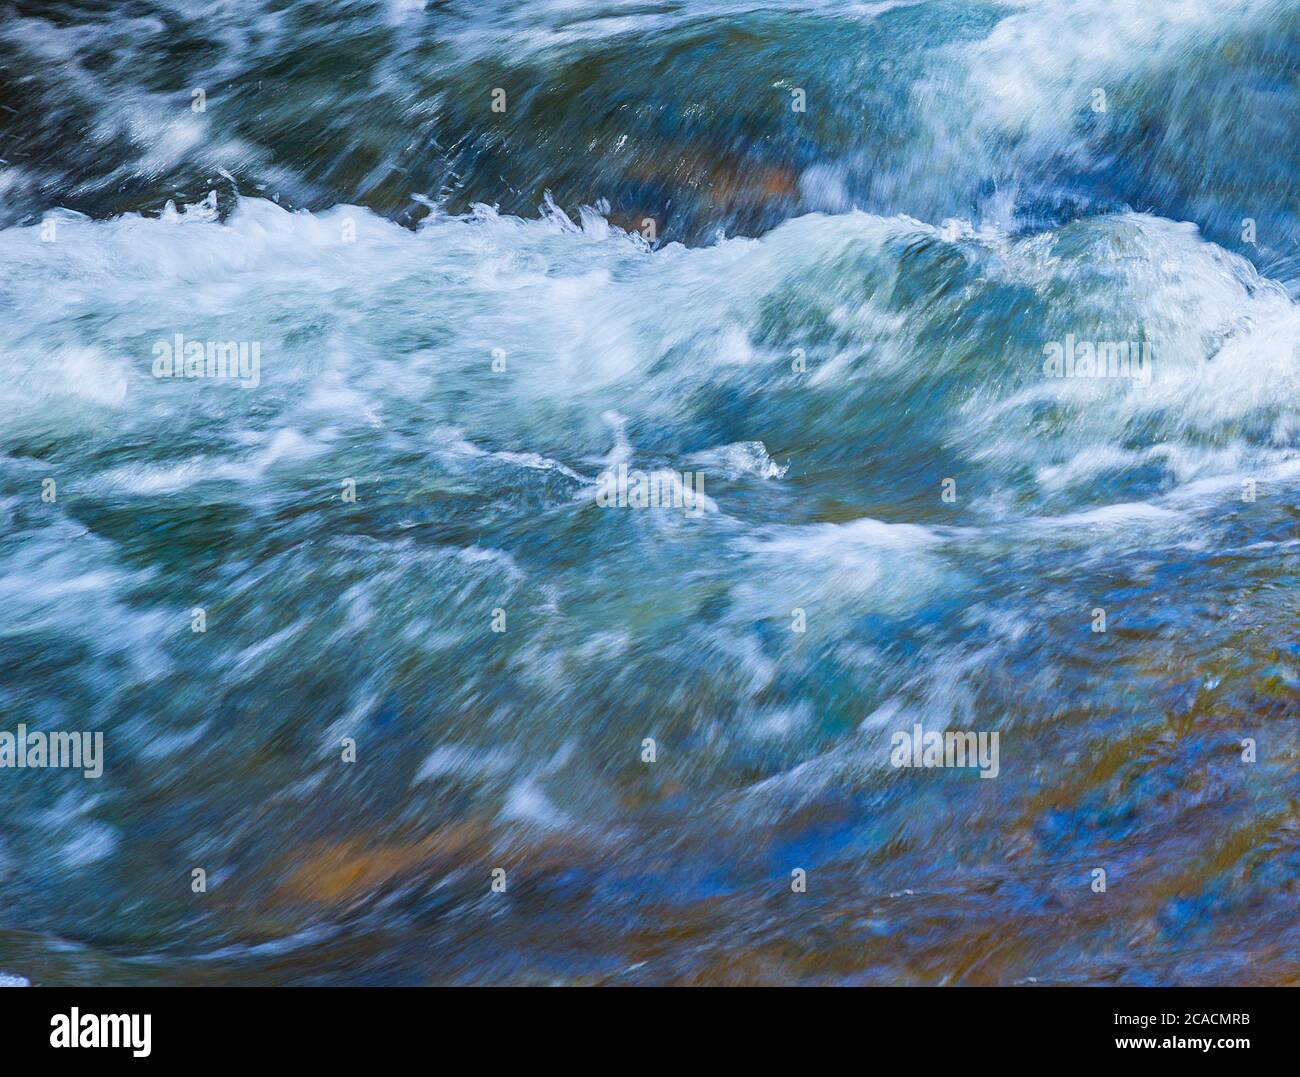 River water. Stock Photo